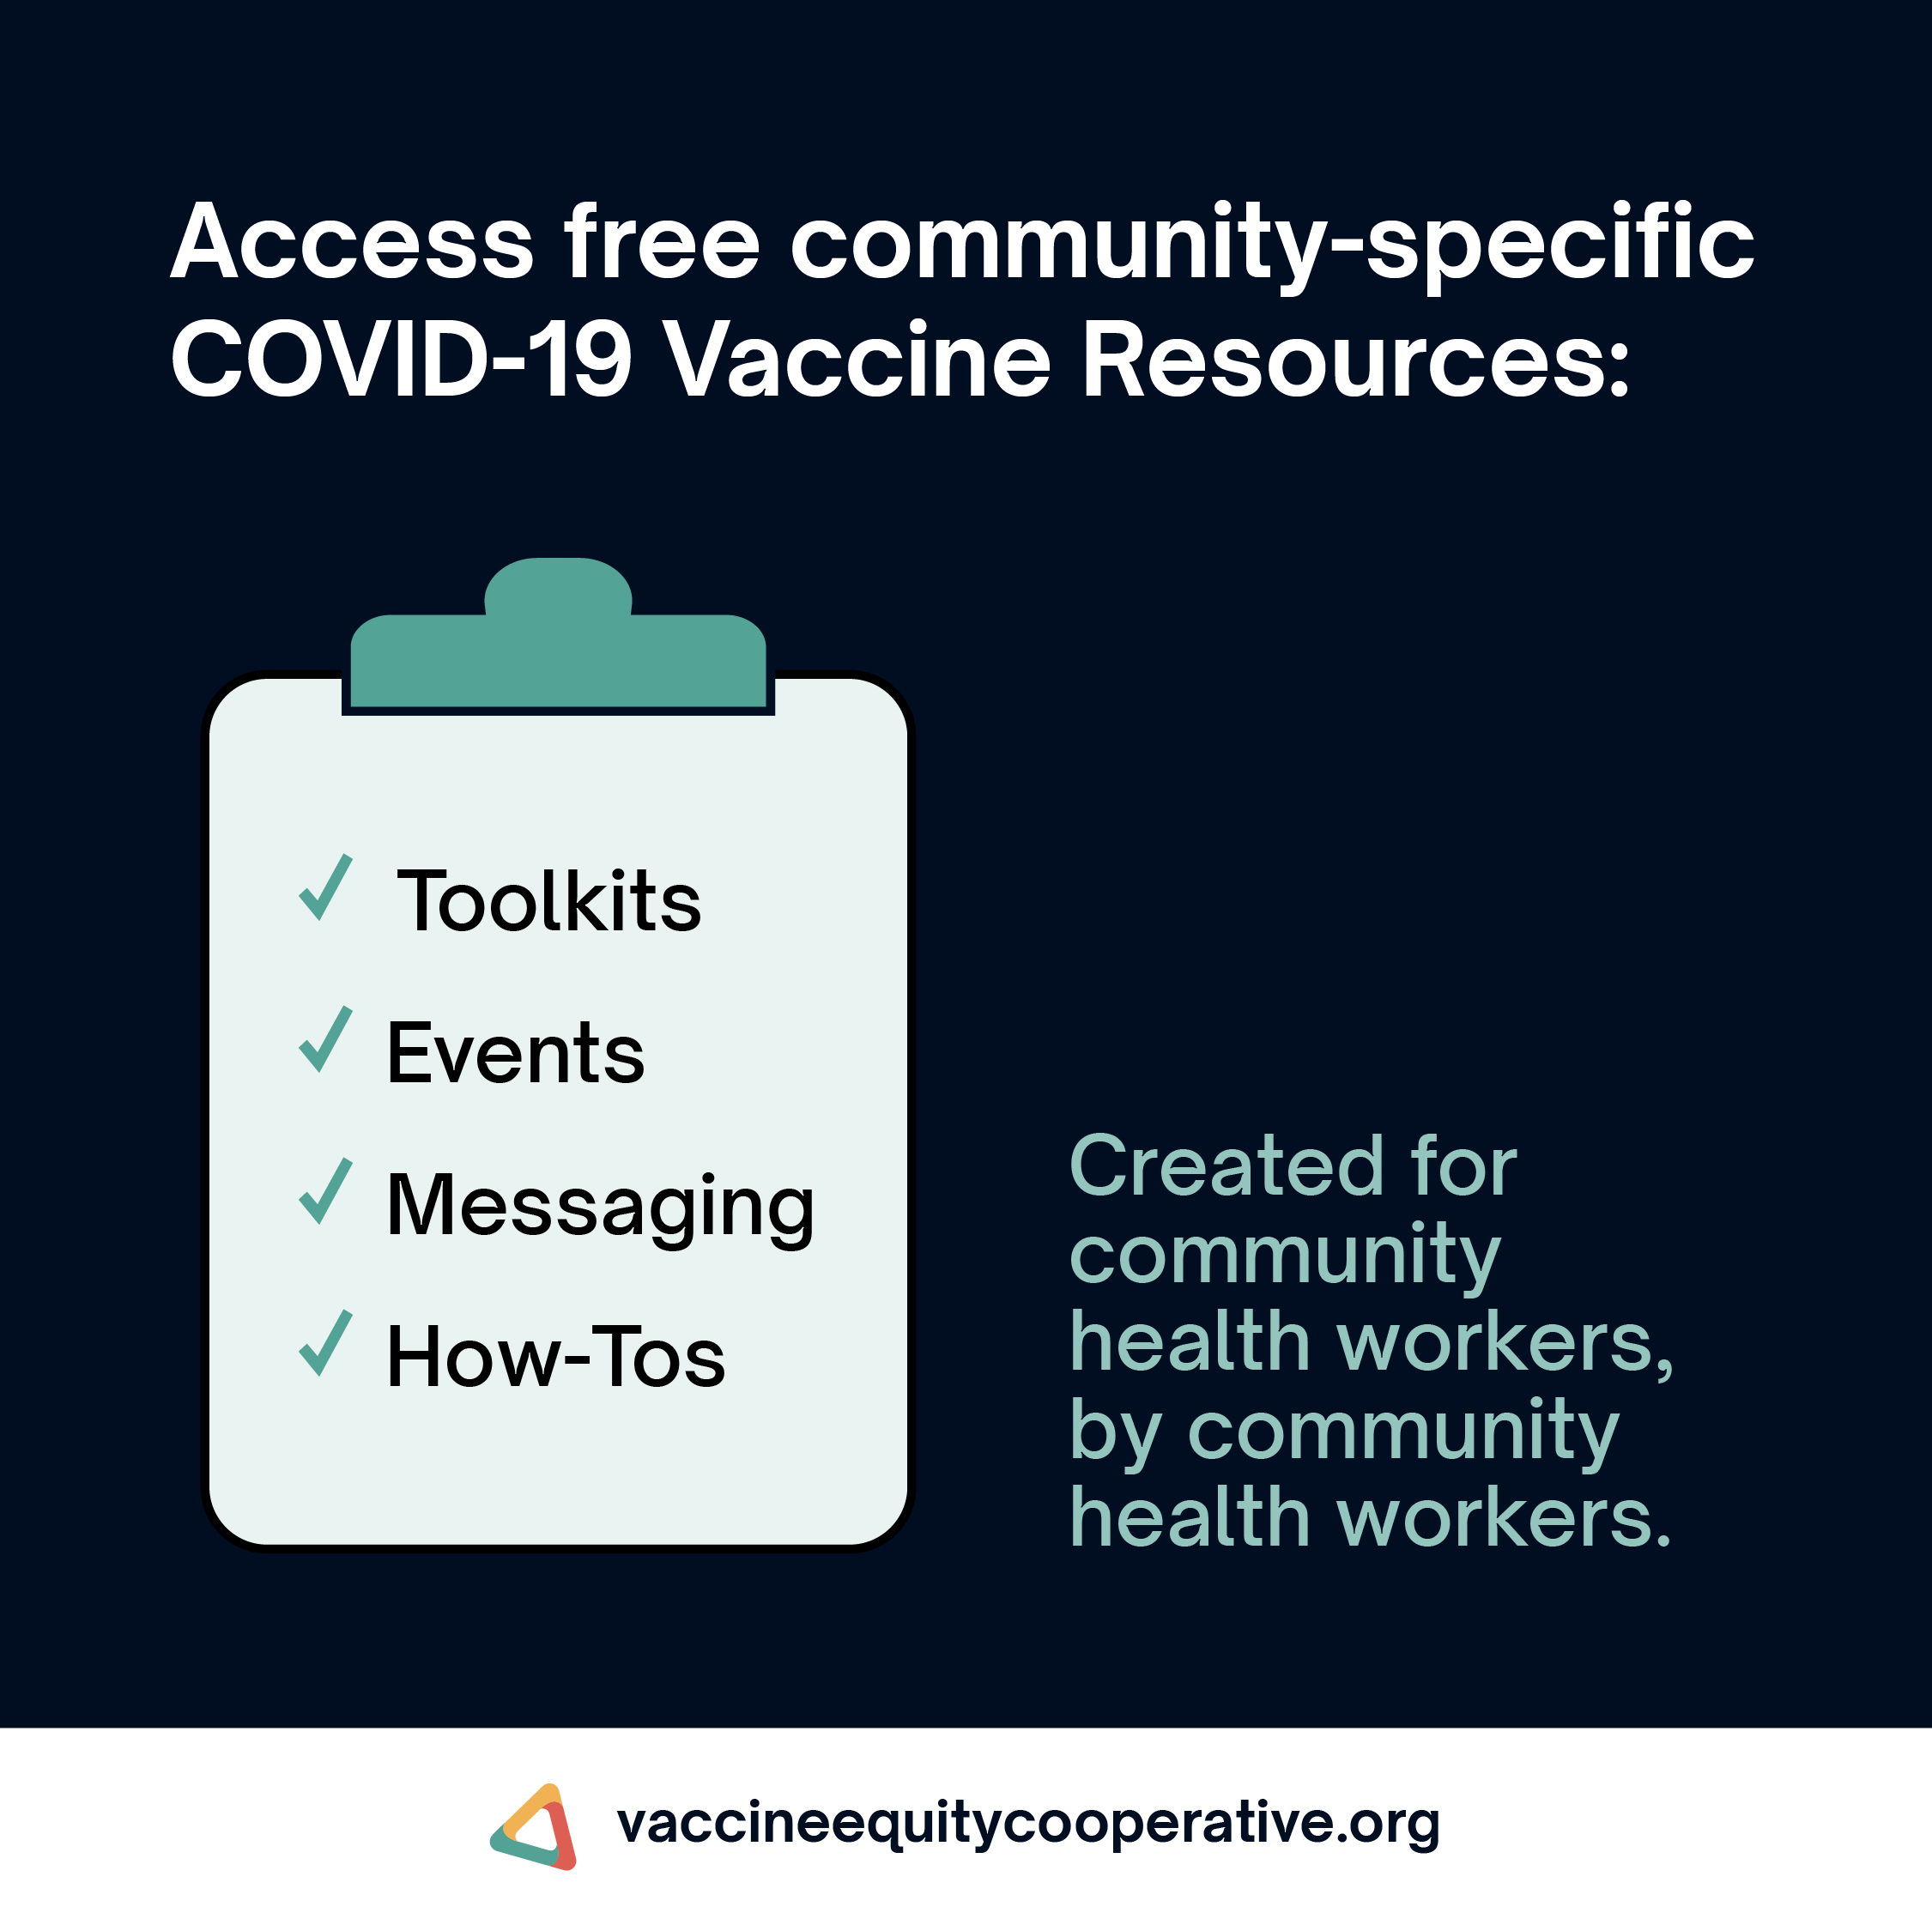 Access free community-specific COVID-19 Vaccine Resources: Toolkits, events, messaging, how-tos. Created by community health workers, by community health workers.